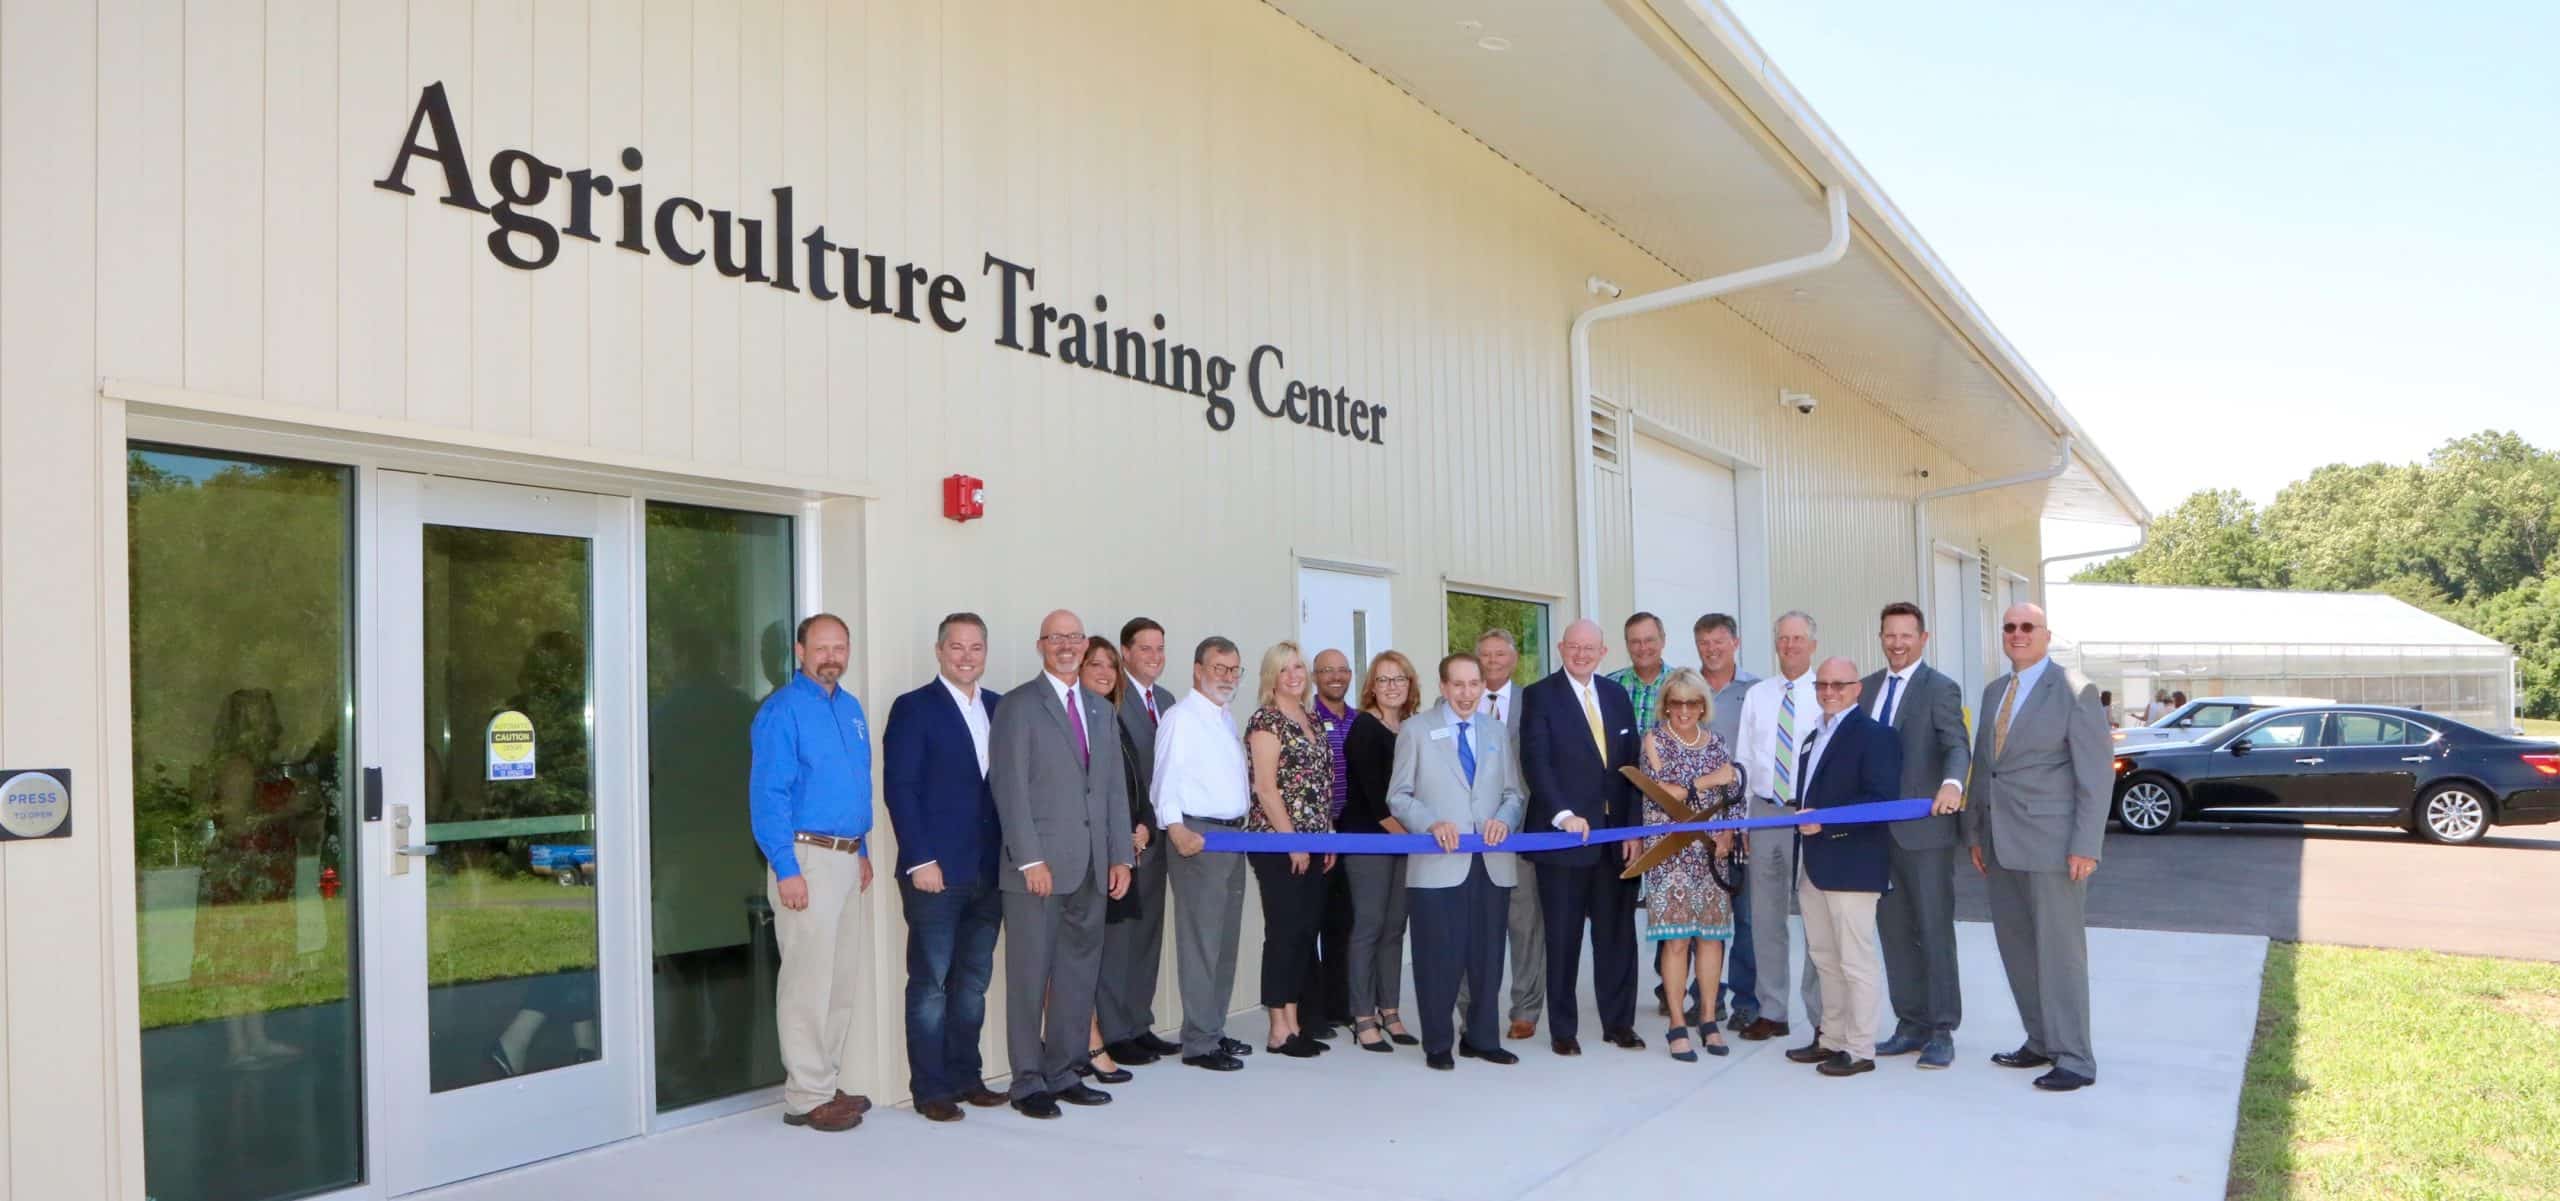 OTC officials and community partners cut the ribbon in front of the Agriculture Training Center at Richwood Valley